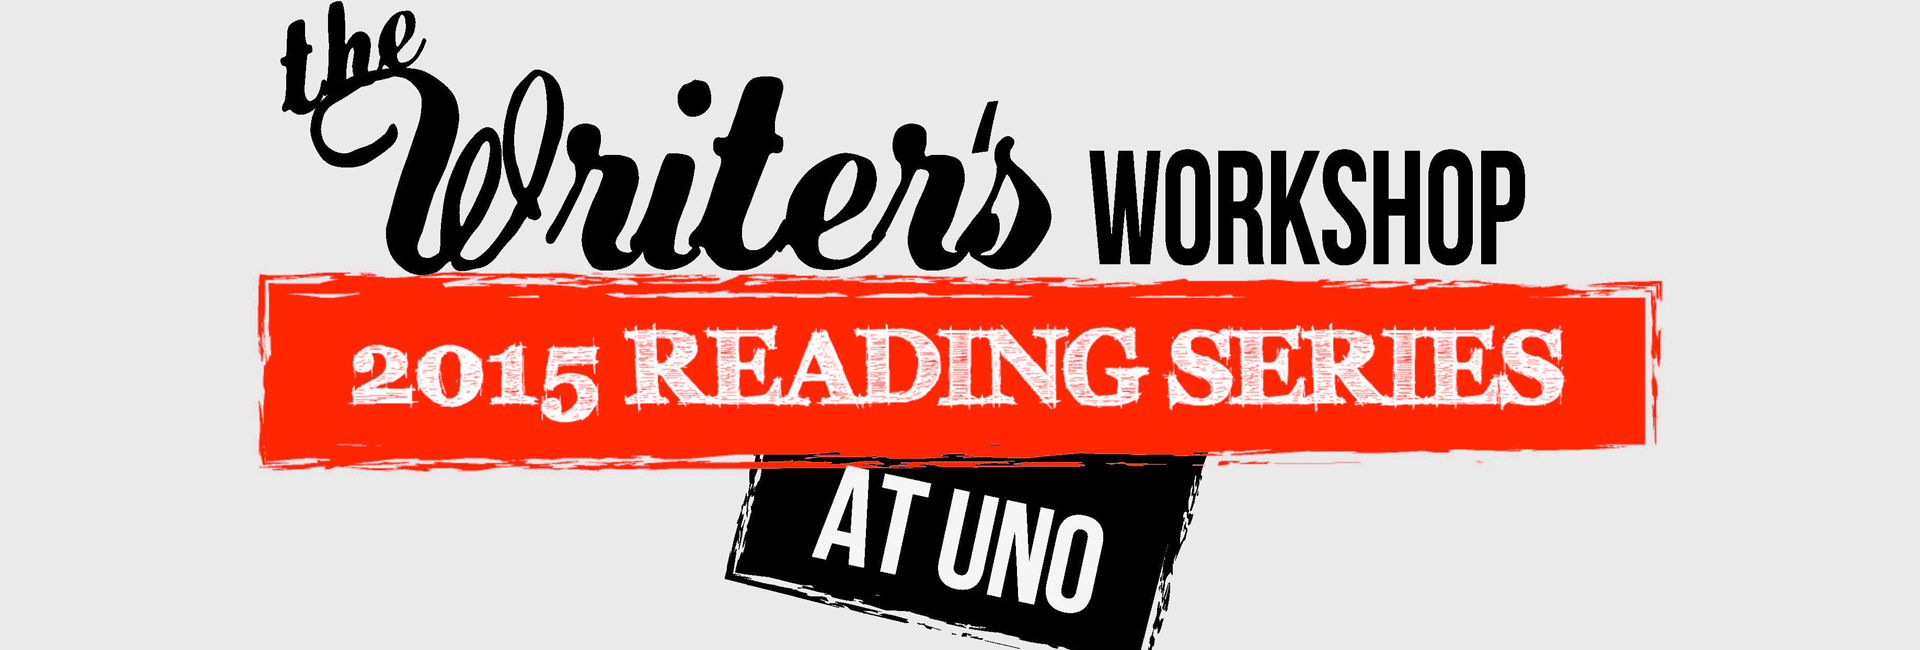 Each event of the Writer's Workshop Reading Series is free and open to the public.